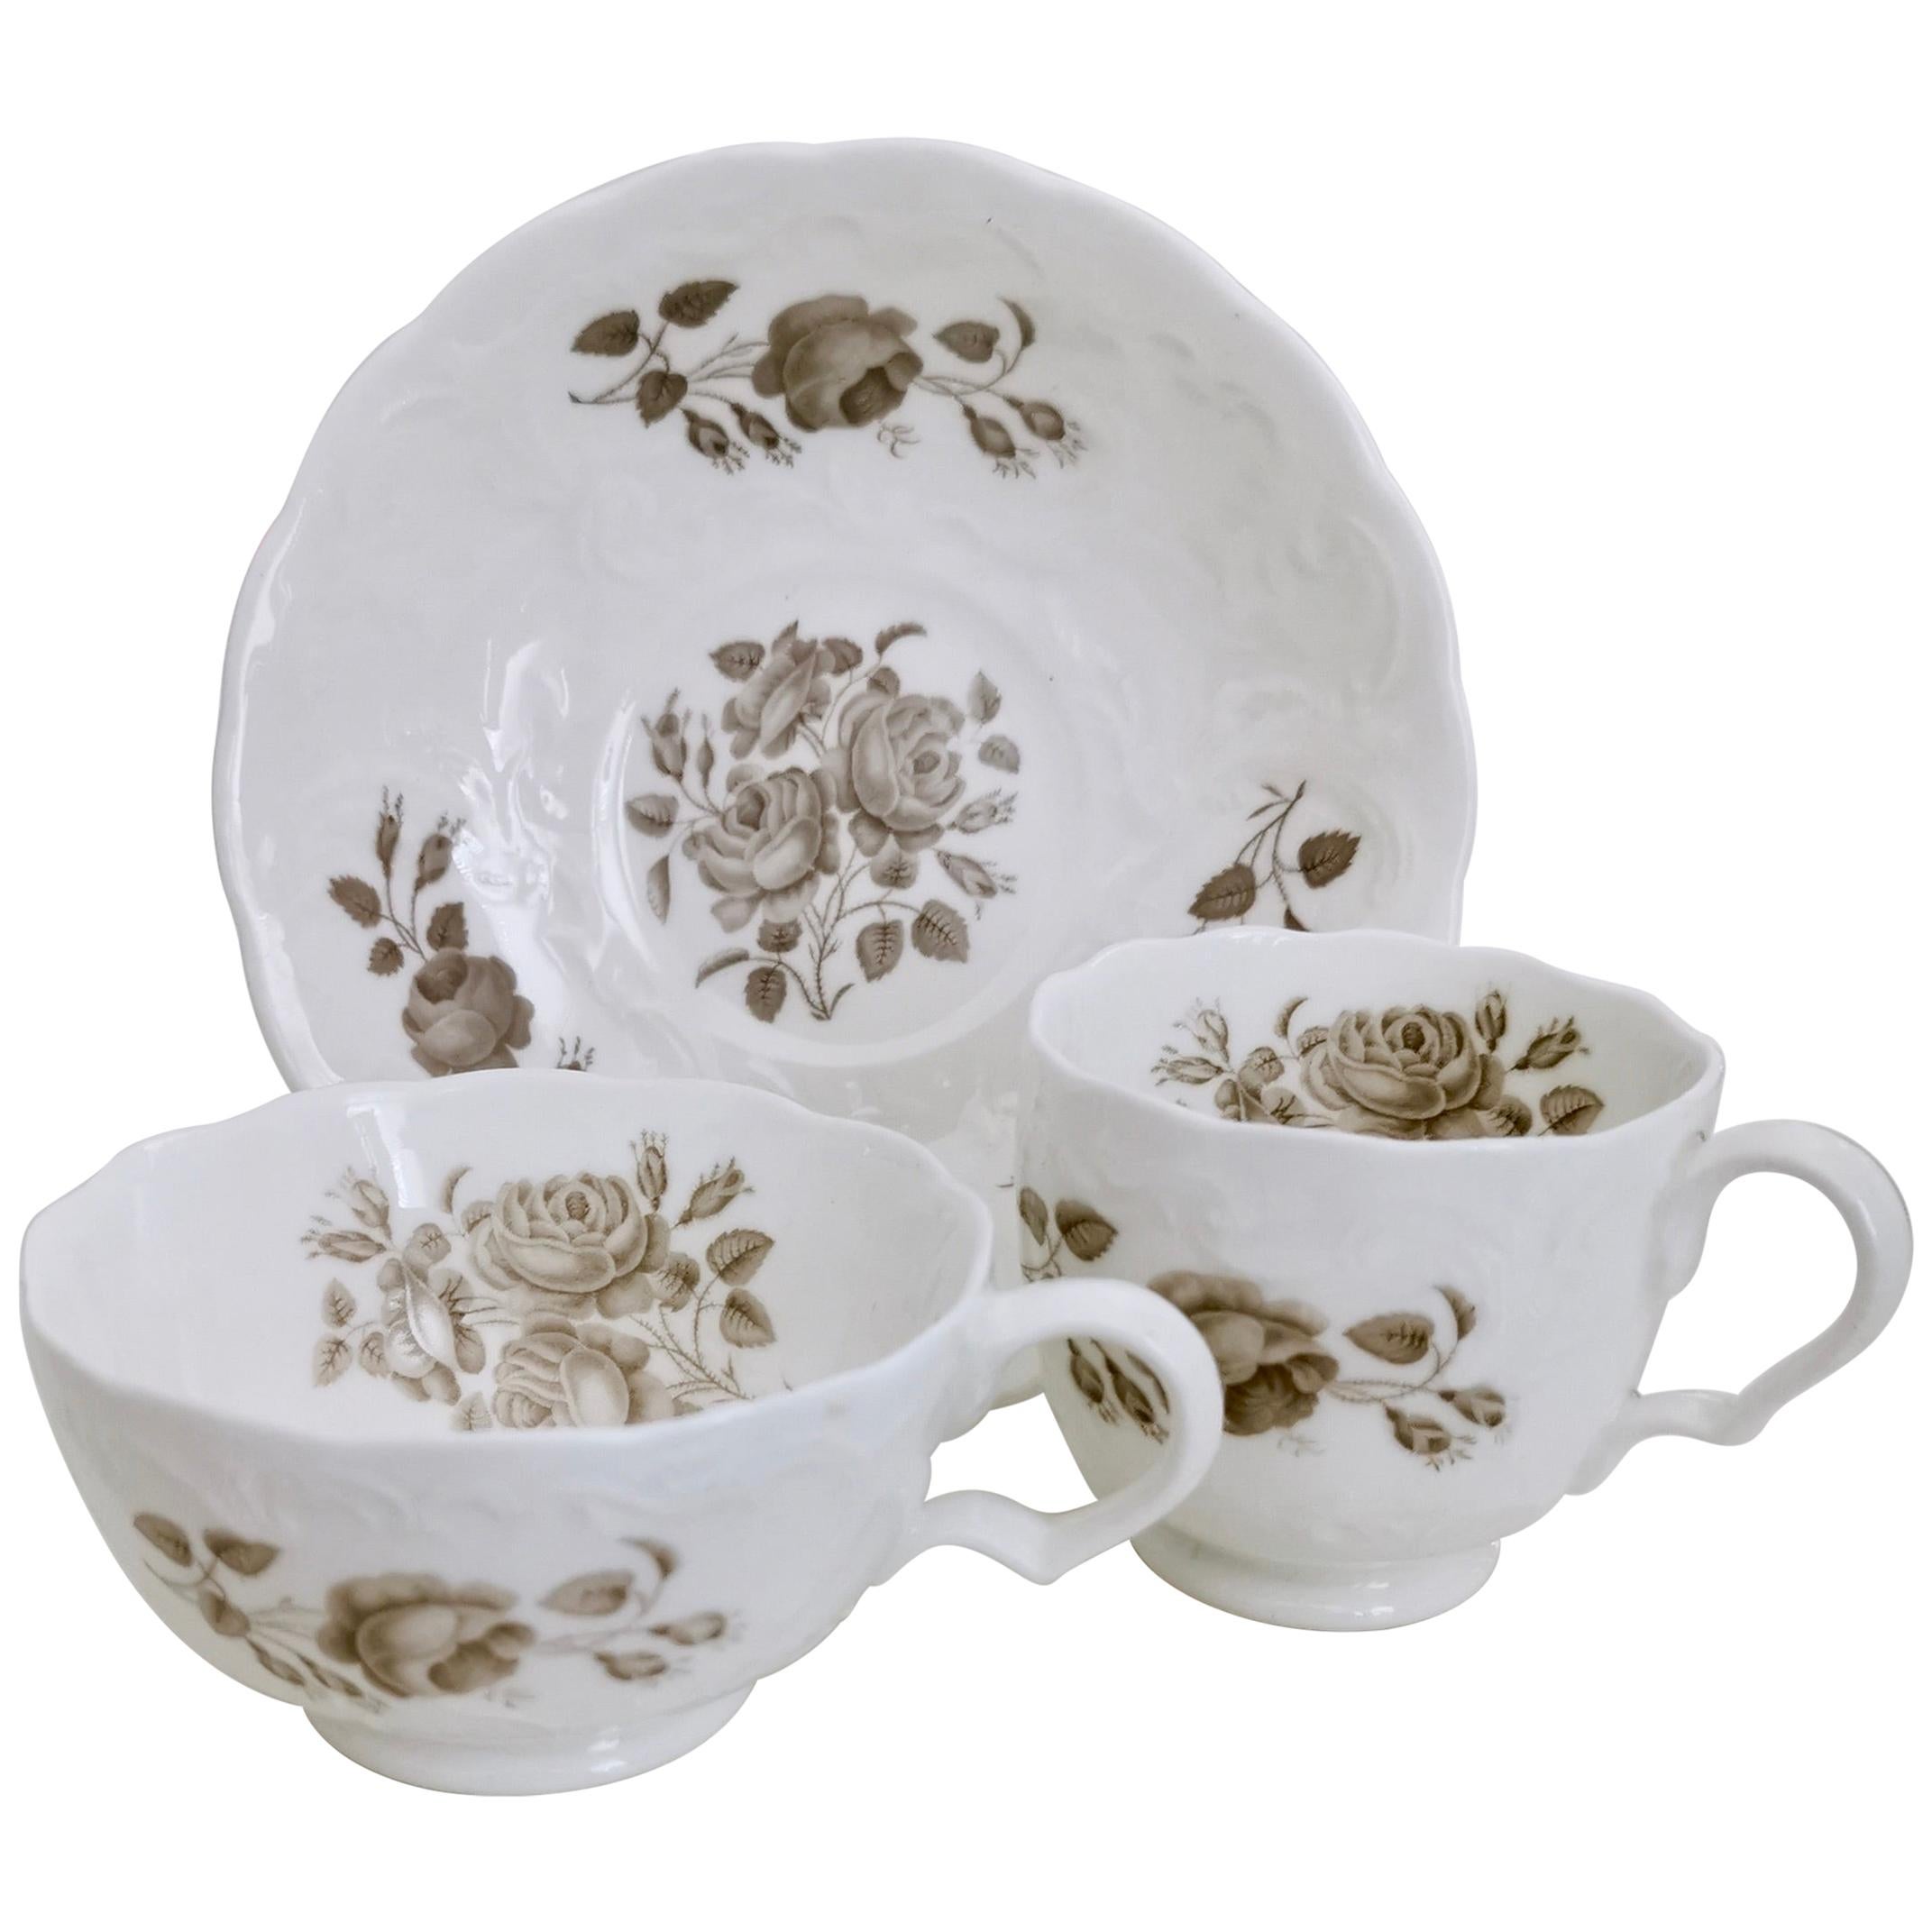 Minton Porcelain Teacup Trio, Bath Embossed White with Sepia Roses, Regency 1830